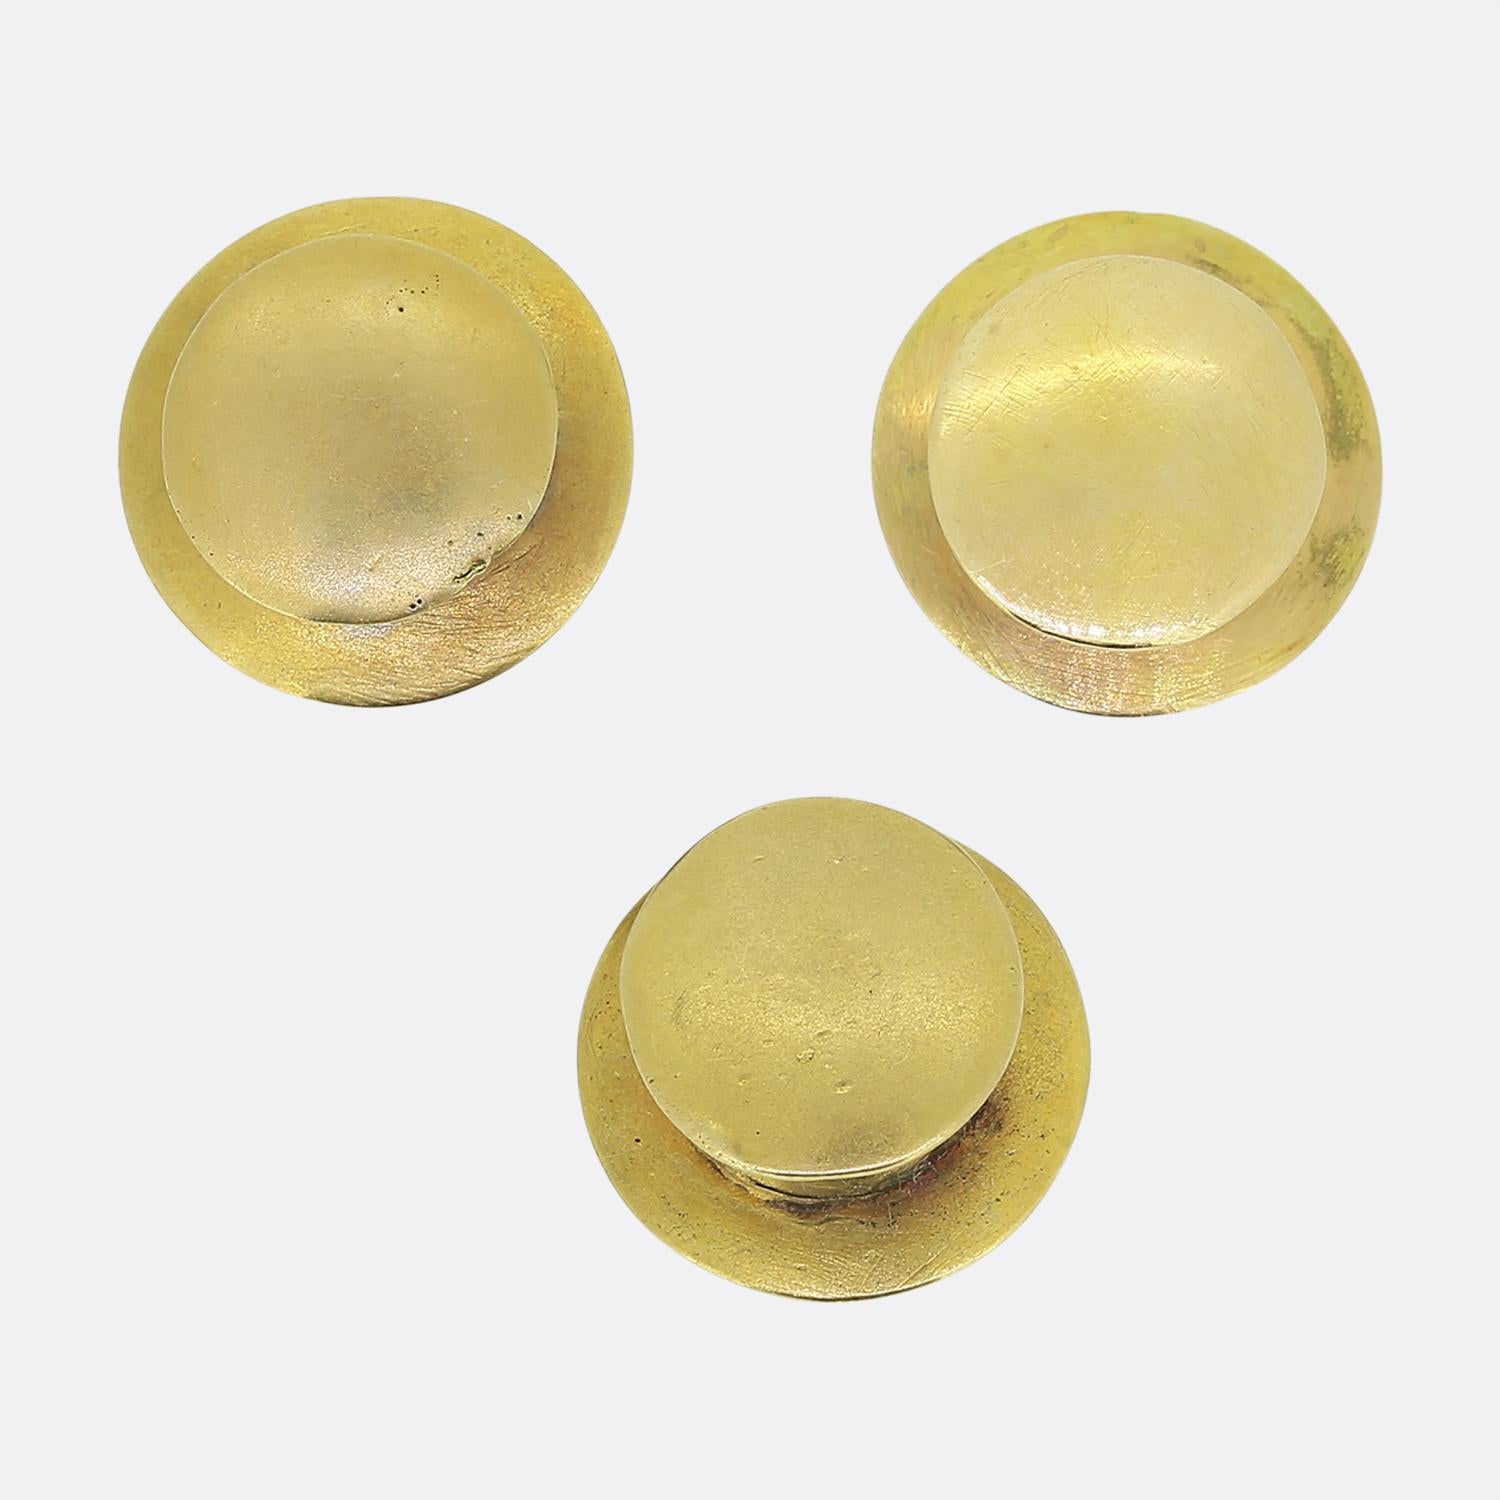 Here we have an excellent antique shirt stud set. A trio of shirt studs have been crafted from a rich 18ct yellow gold into a circular shape with a convex centre. Each piece plays host to a single oval faceted vivid green emerald in a fine milgrain